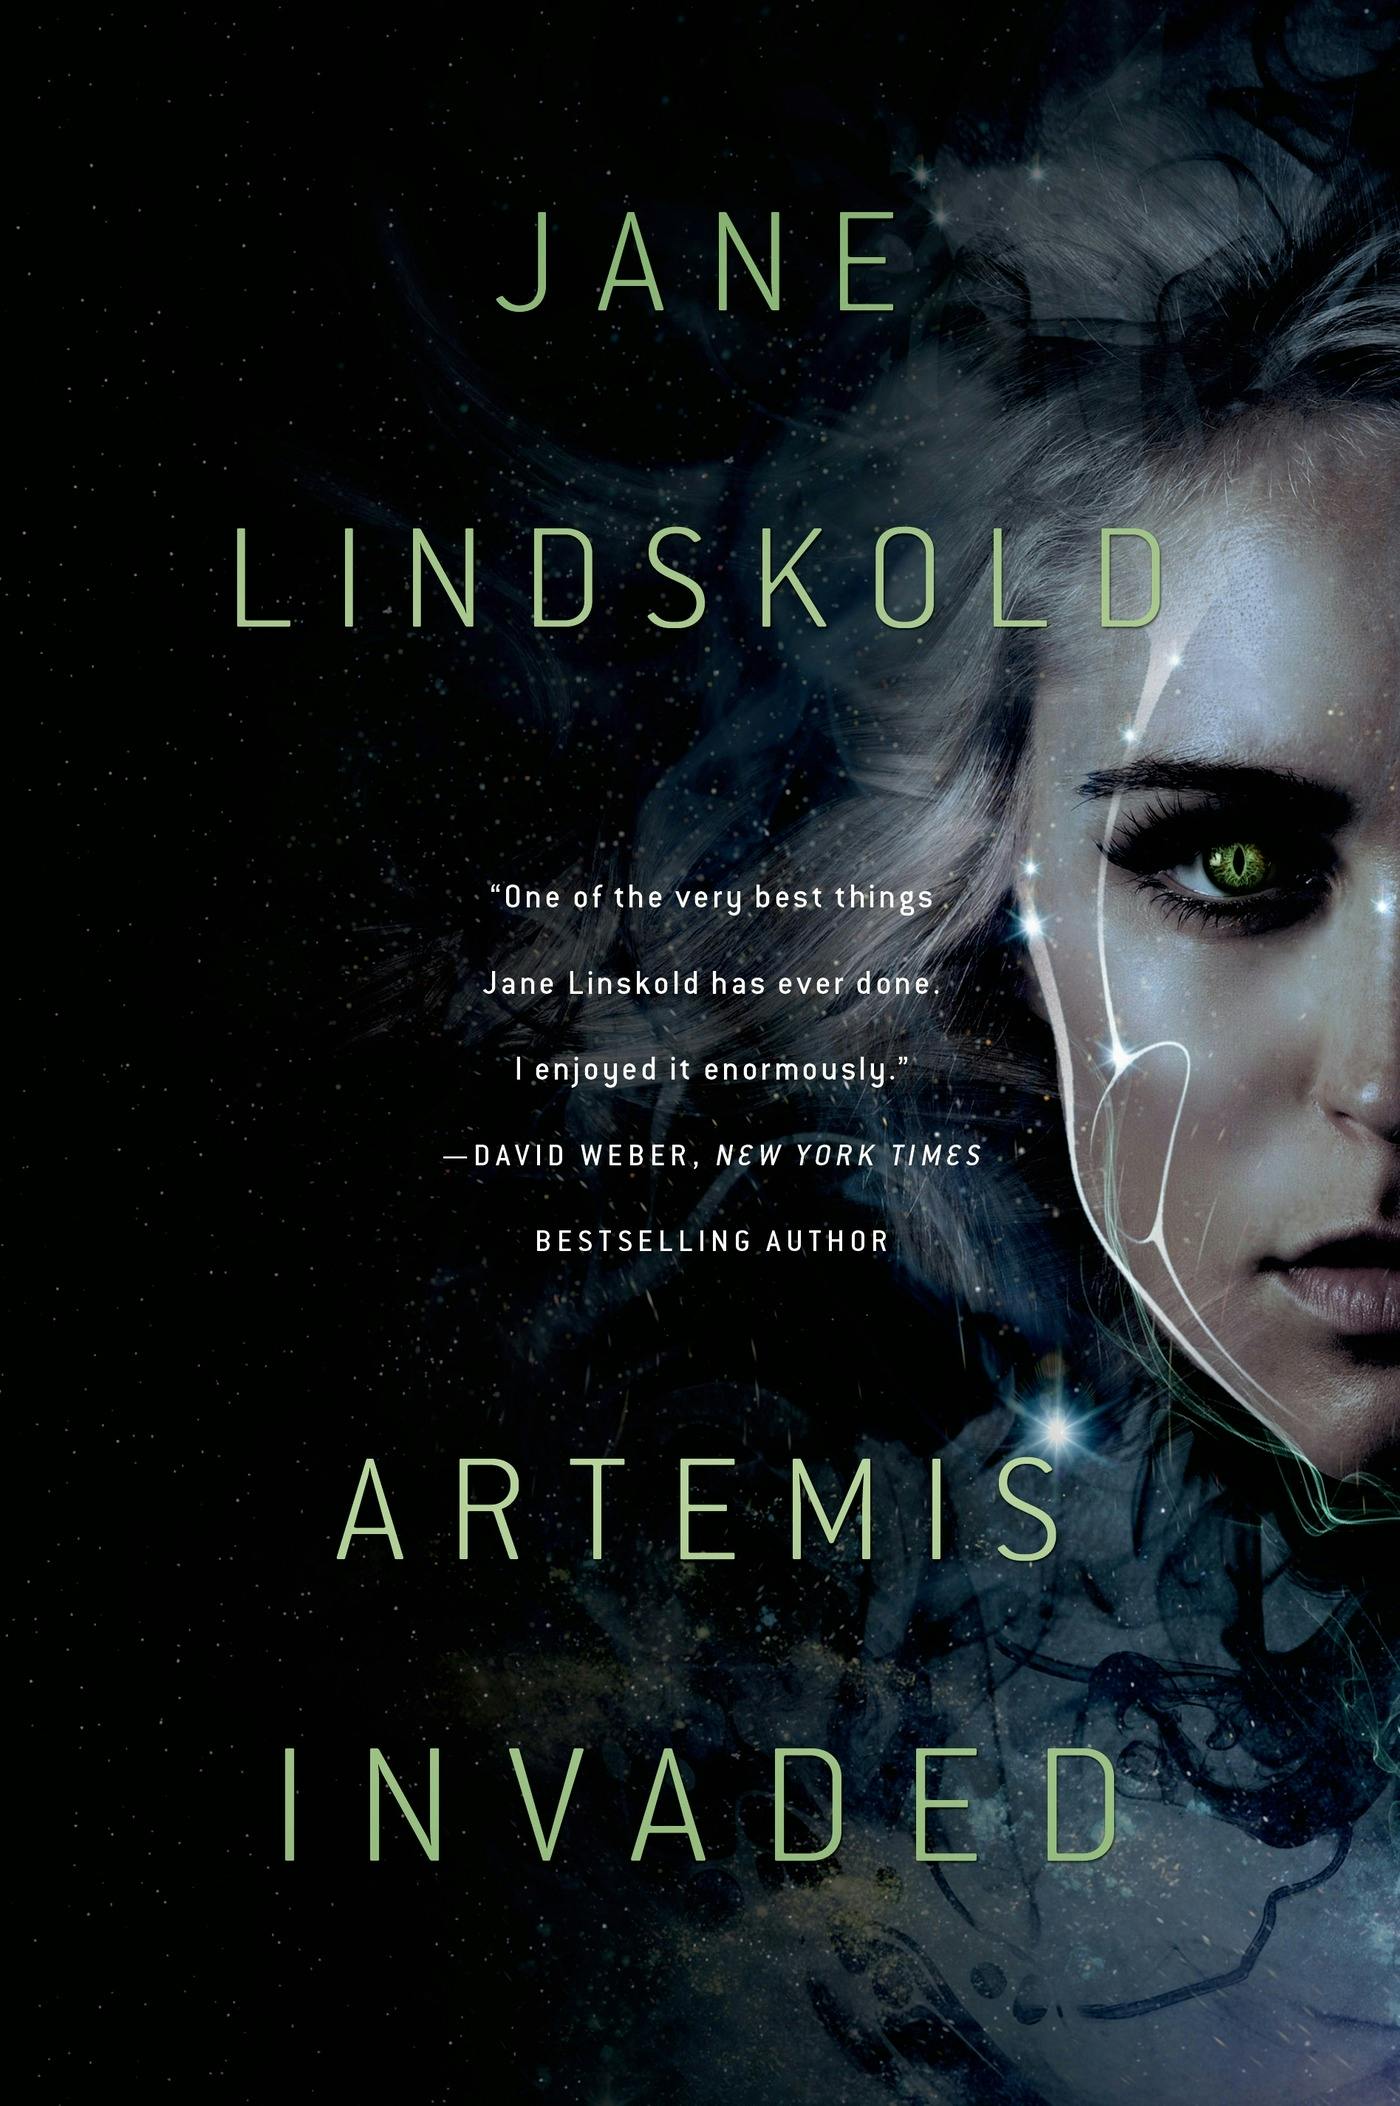 Cover for the book titled as: Artemis Invaded